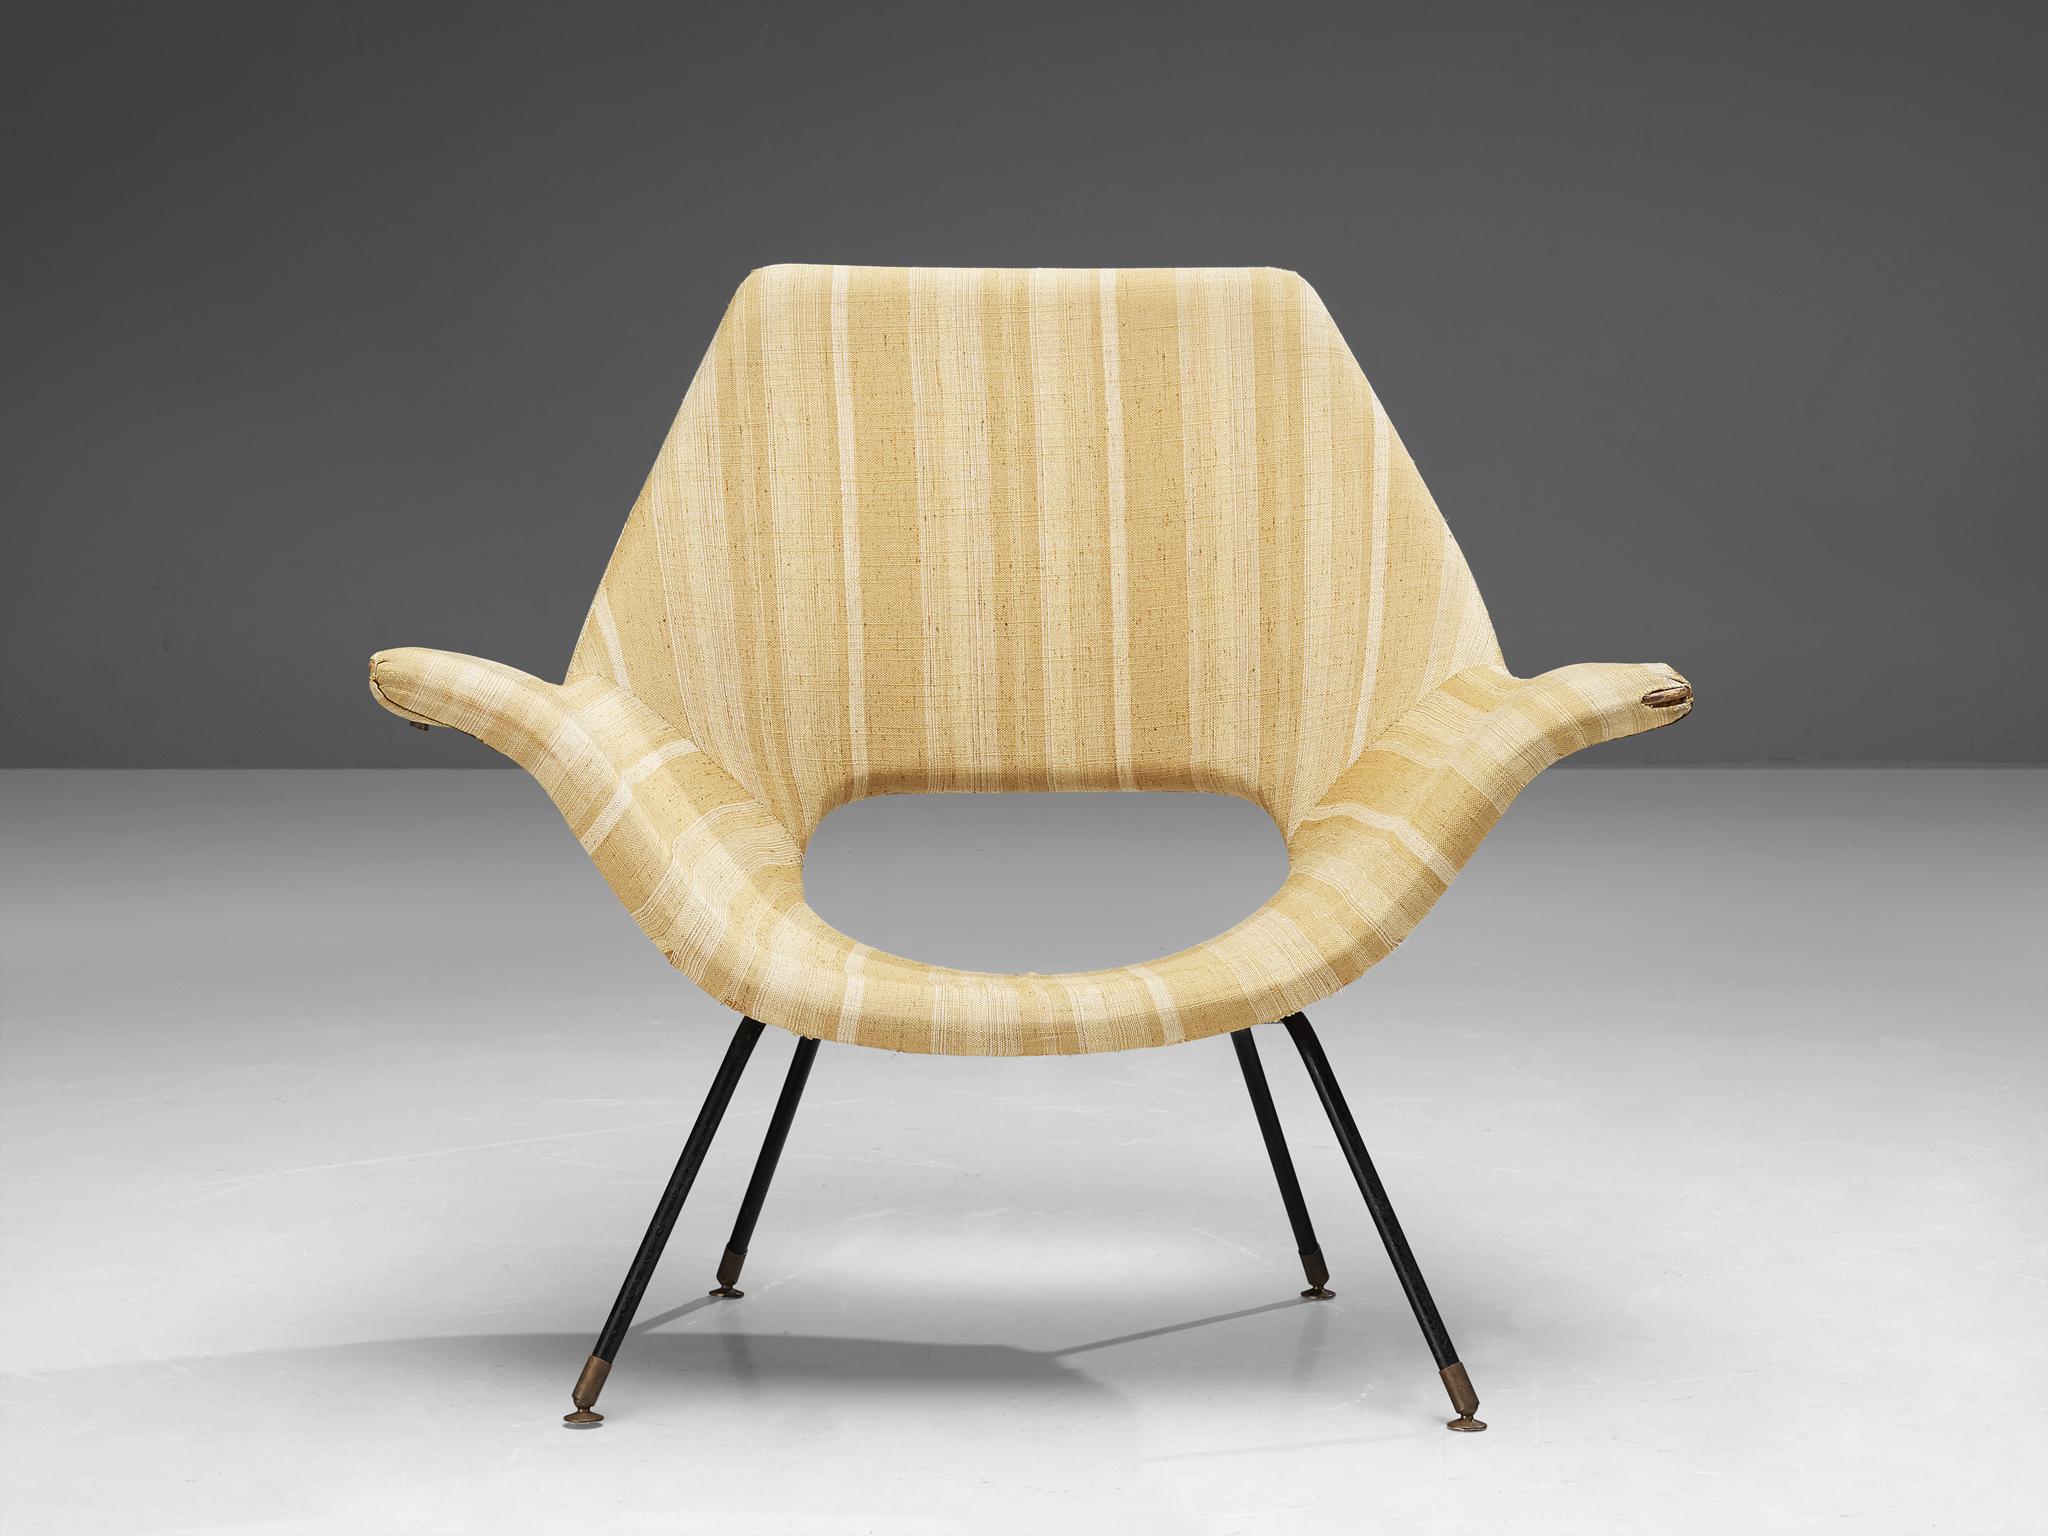 Augusto Bozzi for Saporiti, lounge chair, fabric, metal, brass, Italy, 1960s

This Italian lounge chair by Augusto Bozzi (1924-1982) is characterized by a modest aesthetic due to its straight lines and round edges. The lower body of the backrest